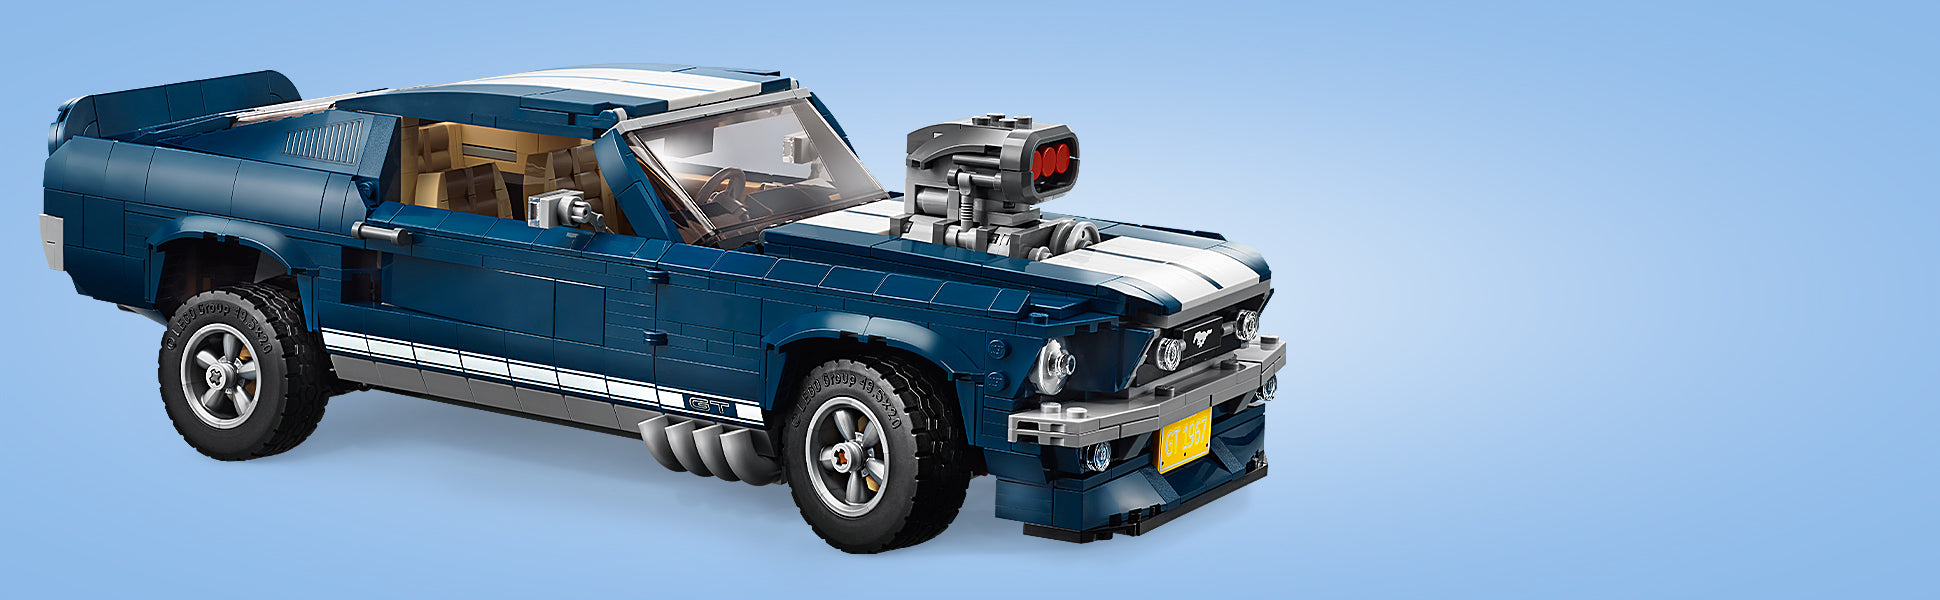 Discover the magic of an iconic 1960s American muscle car with the LEGO® Creator Ford Mustang, featuring a dark blue body with white racing stripes, hood scoop, printed Mustang grille emblem, GT decals and 5-spoke wheels with tires for good grip. This authentic replica, which was developed with input from Ford, can be equipped with various extras of your choice, such as a number of license plates, a supercharger, a 'ducktail' rear spoiler, cool exhausts, a 'chin' spoiler at the front and a nitro tank . You can even adjust the height of the rear axle to give the car an extra brutal look! Remove the roof or open the doors and you have access to the detailed interior with beautiful seats, a radio, a working steering wheel and a gear lever in the center console. Store items in the trunk or open the hood to reveal the detailed, large 390 V8 engine, including a battery, hoses and air filter. Specially designed for a challenging and enjoyable building experience, this advanced building set packed with nostalgia makes a fantastic focal point for your home or office. An authentic replica of a Ford Mustang from the 1960s with a dark blue body with white racing stripes, an air intake, 5-spoke rims with tires for good grip and a number of optional extras. Open the doors or remove the roof to access the detailed interior, with beautiful seats, a radio, a gear lever in the center console and a working steering wheel. Open the trunk to store items and lift the hood to reveal the detailed Ford Mustang V8 engine with battery, hoses and air filter. Also includes a printed Mustang grille emblem and 2 GT emblems. Customize the Ford Mustang as desired with the included supercharger, a rear ducktail spoiler, cool exhausts, a front chin spoiler and a nitro tank. Choose from a number of different license plates. Open the hood and view the realistic details of the engine. Adjust the height of the rear axle to give the car an extra brutal look! Special elements new for March 2019: 5-spoke rims, a 2x8 brick with arch, a 1x3 tile with mustang logo and a 2x4 arch with 'GT' emblem. Dimensions: approx. 10 cm high, 34 cm long and 14 cm wide.